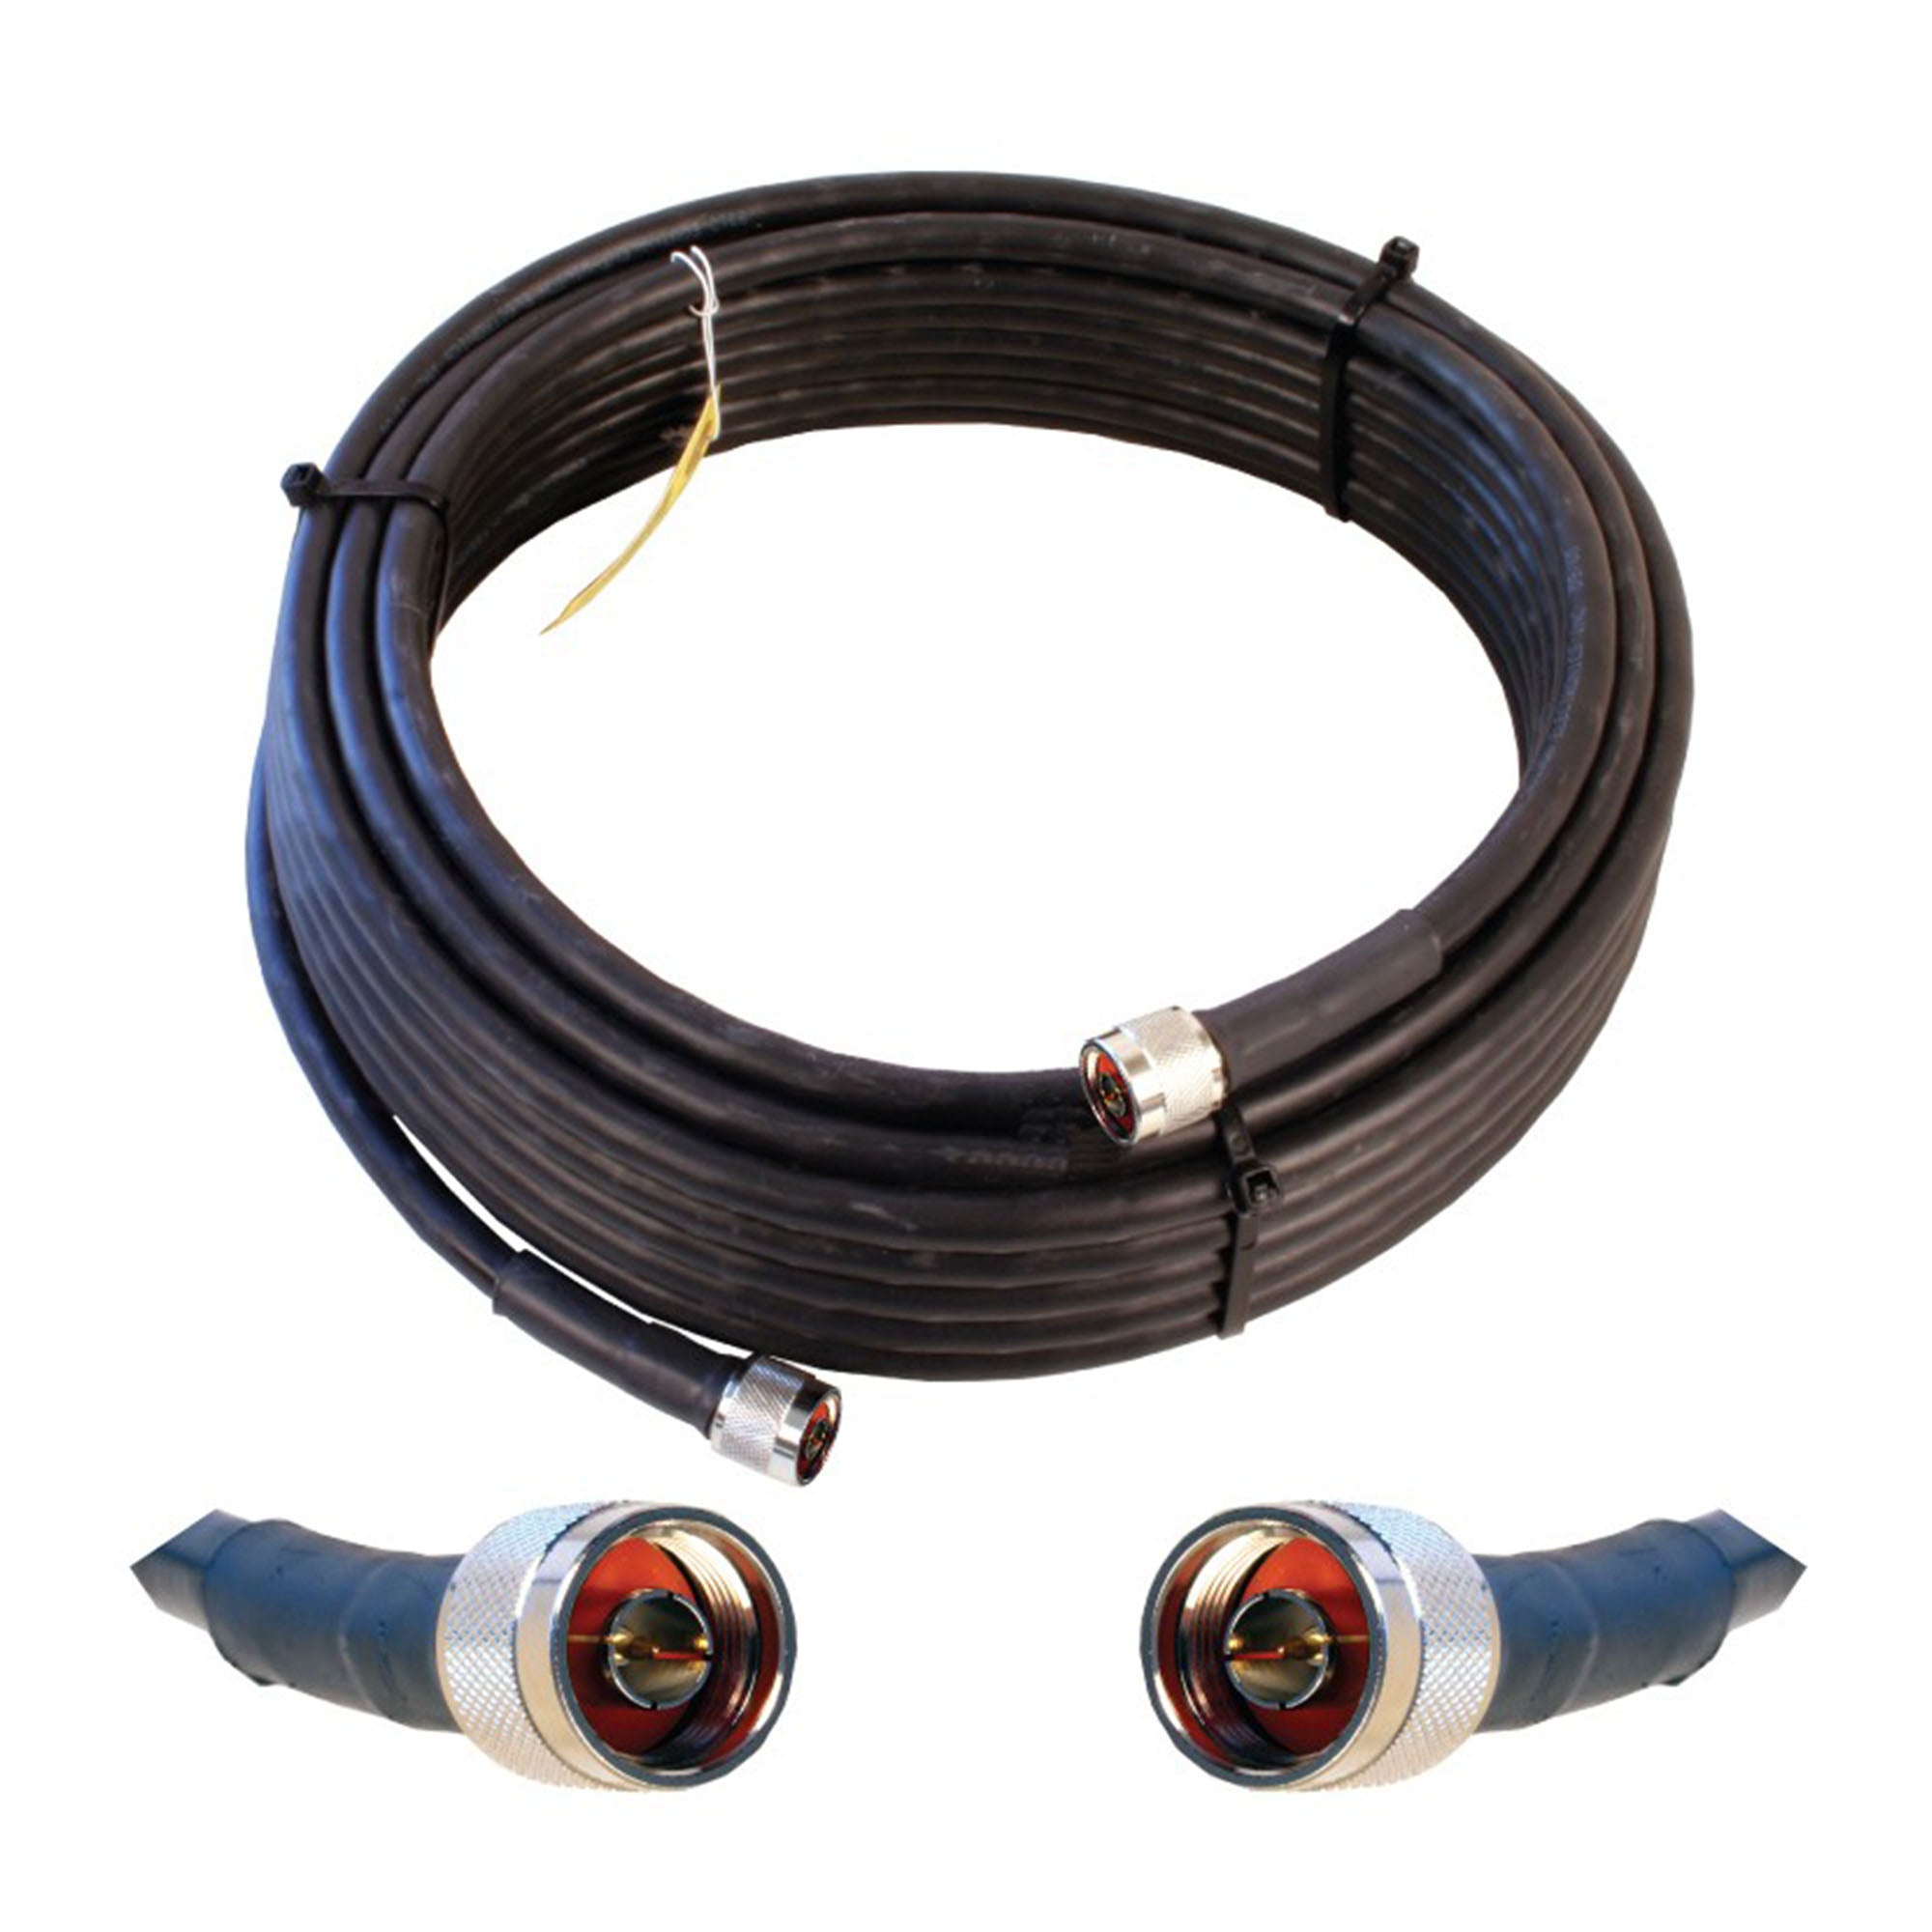 Wilson Electronics Cable 50 ft. Black LMR400 eqiv. ultra low loss cable (N male - N male ends)